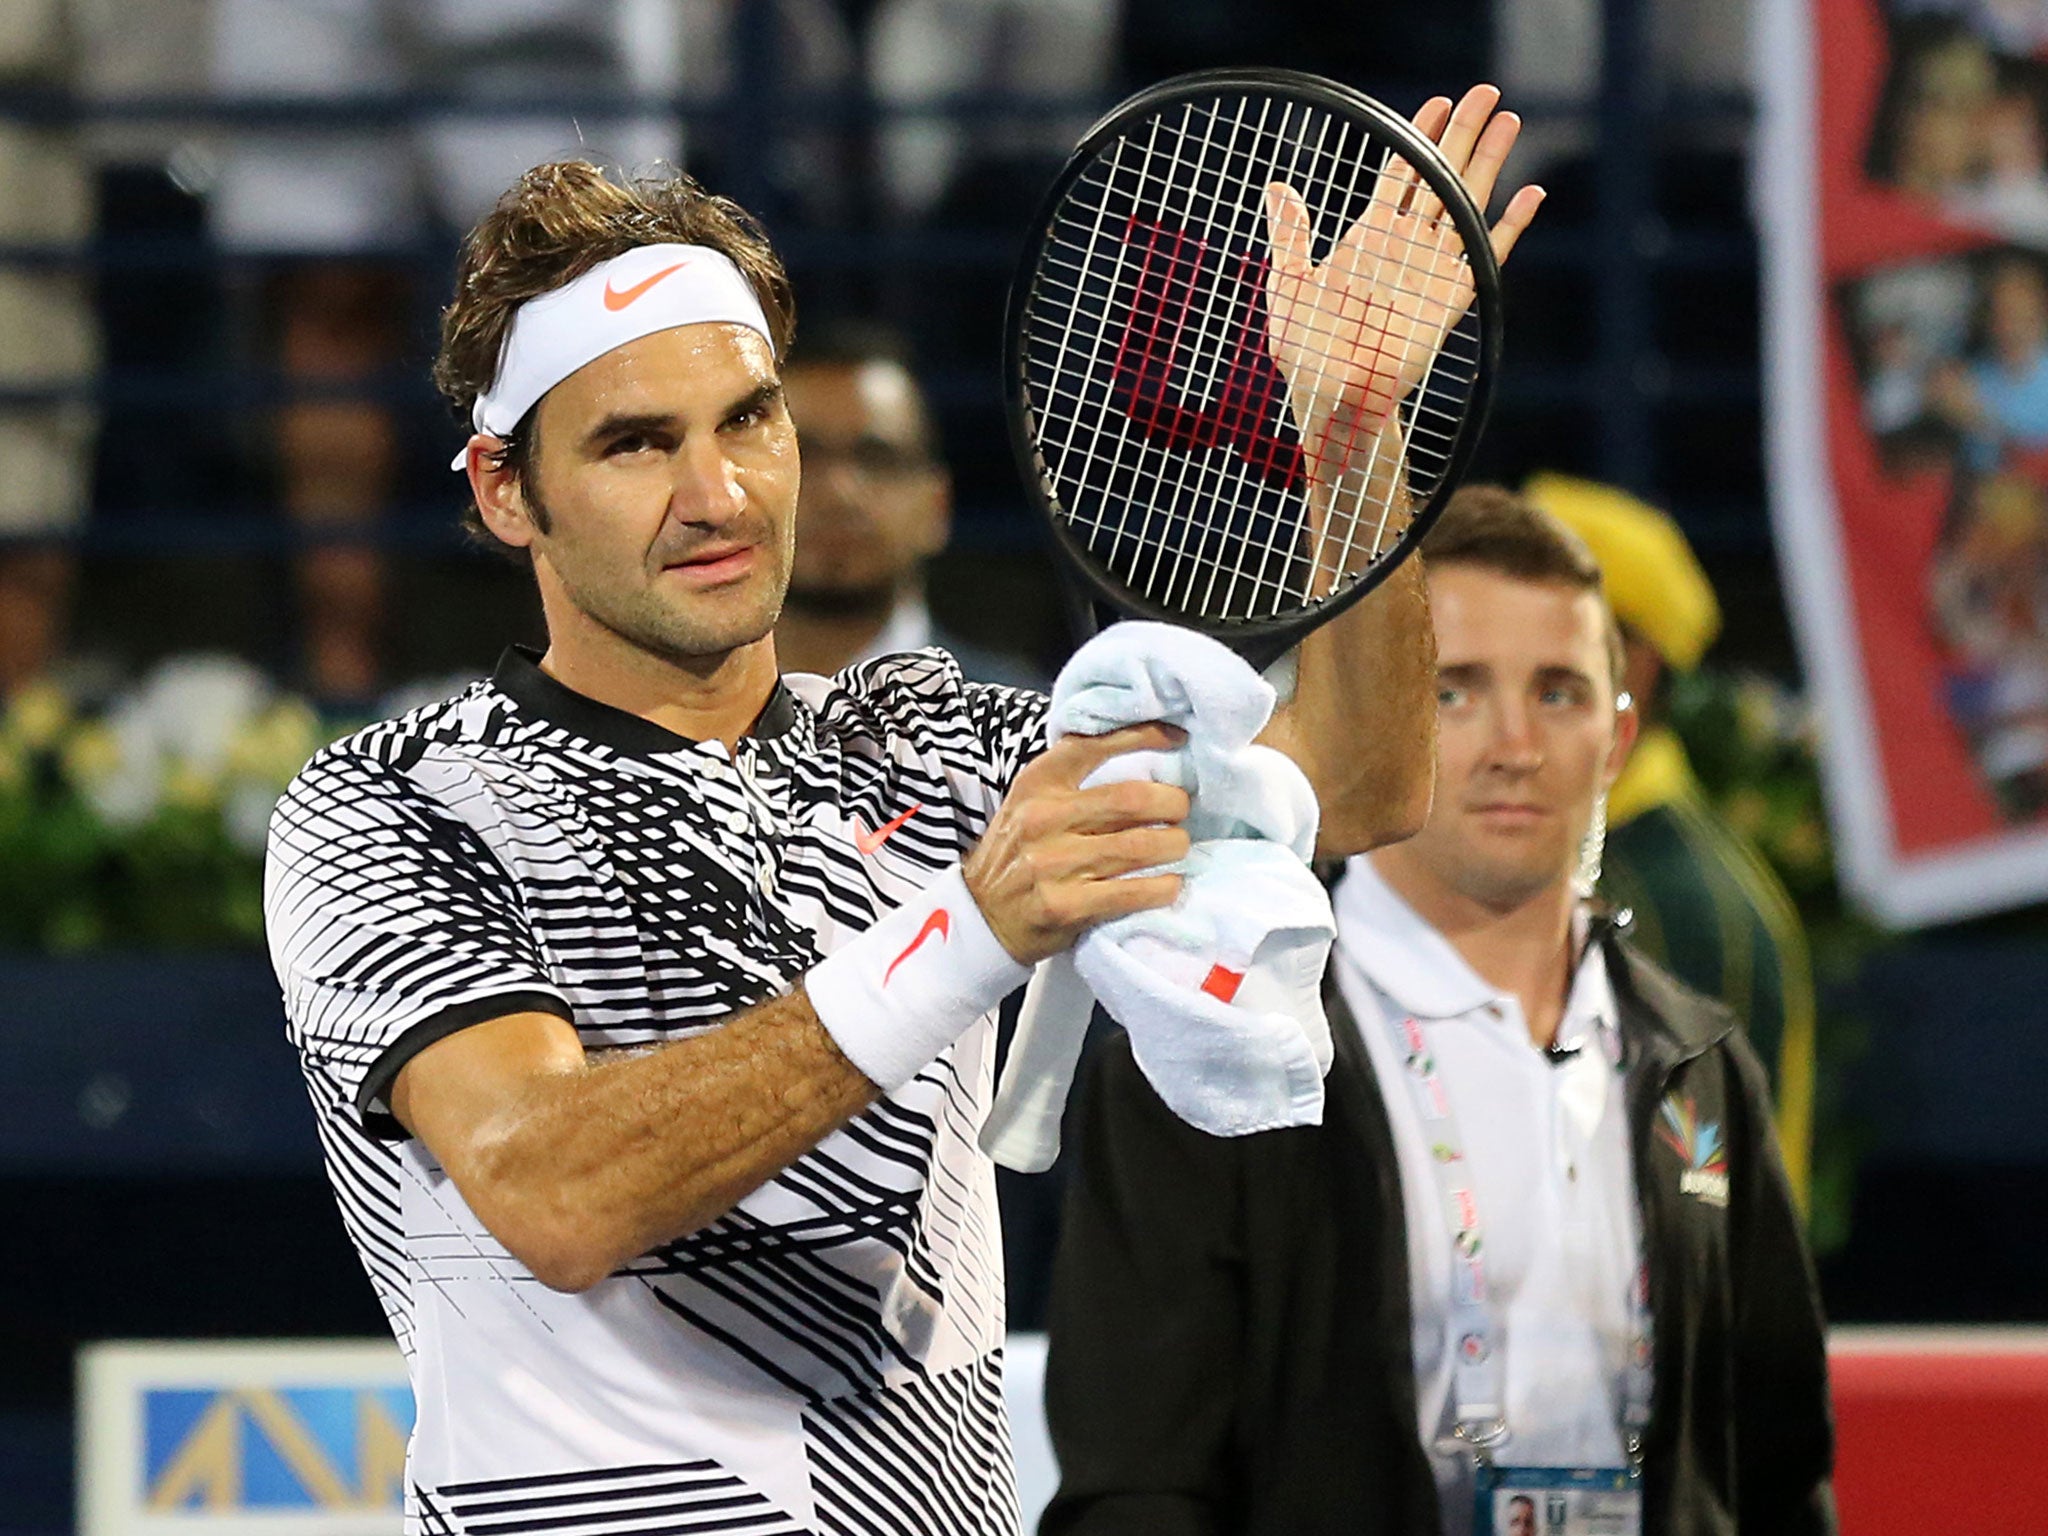 Roger Federer salutes the crowd after his Dubai Championship victory over Benoit Paire